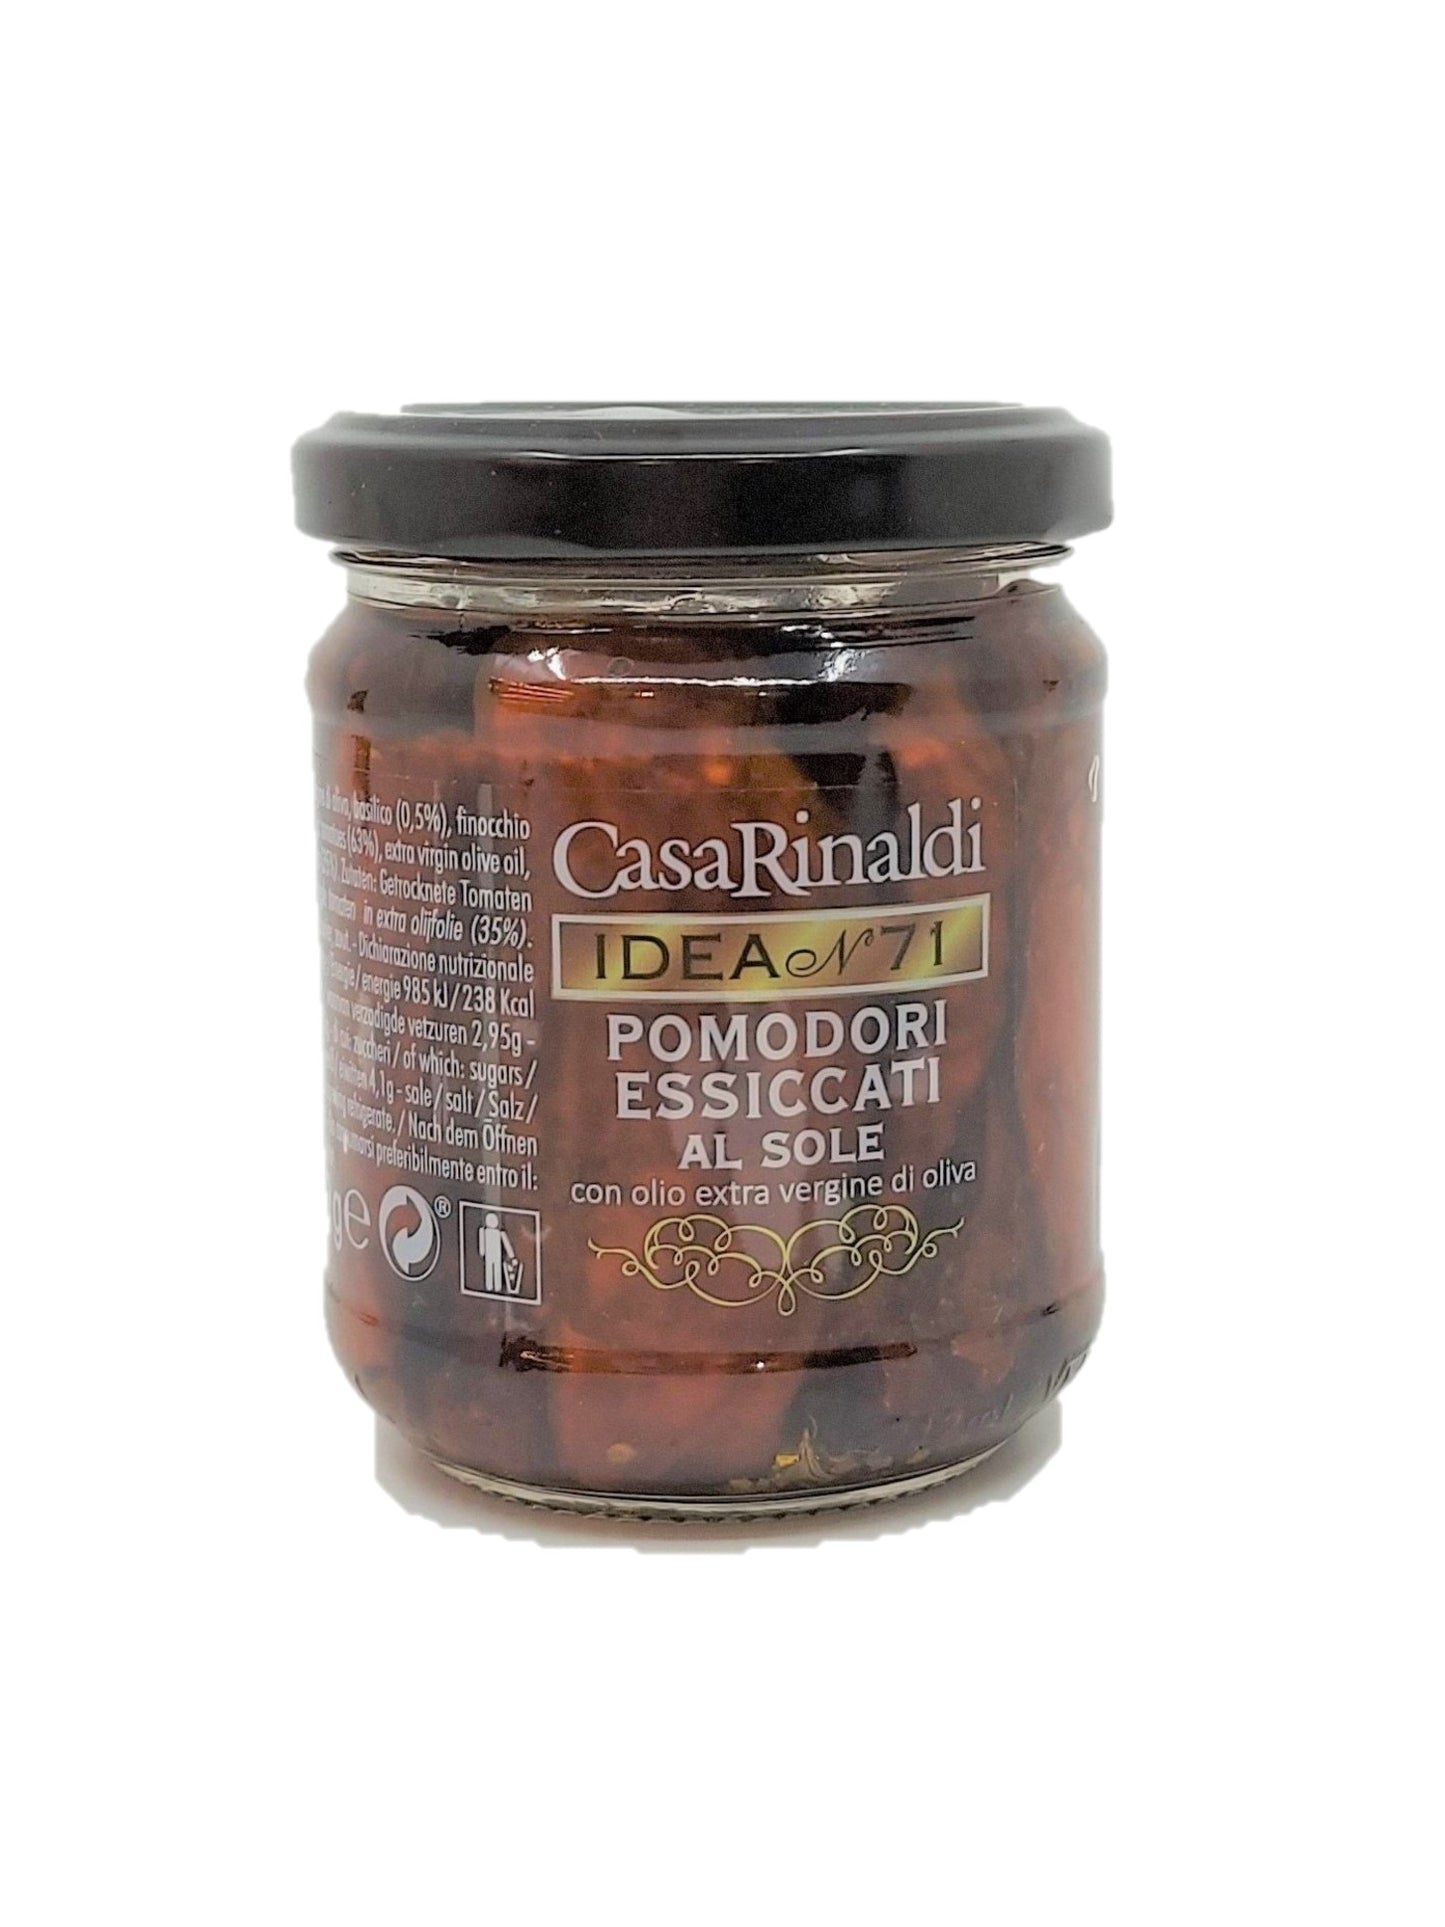 Sun-dried Tomatoes in extra virgin olive oil (200g)